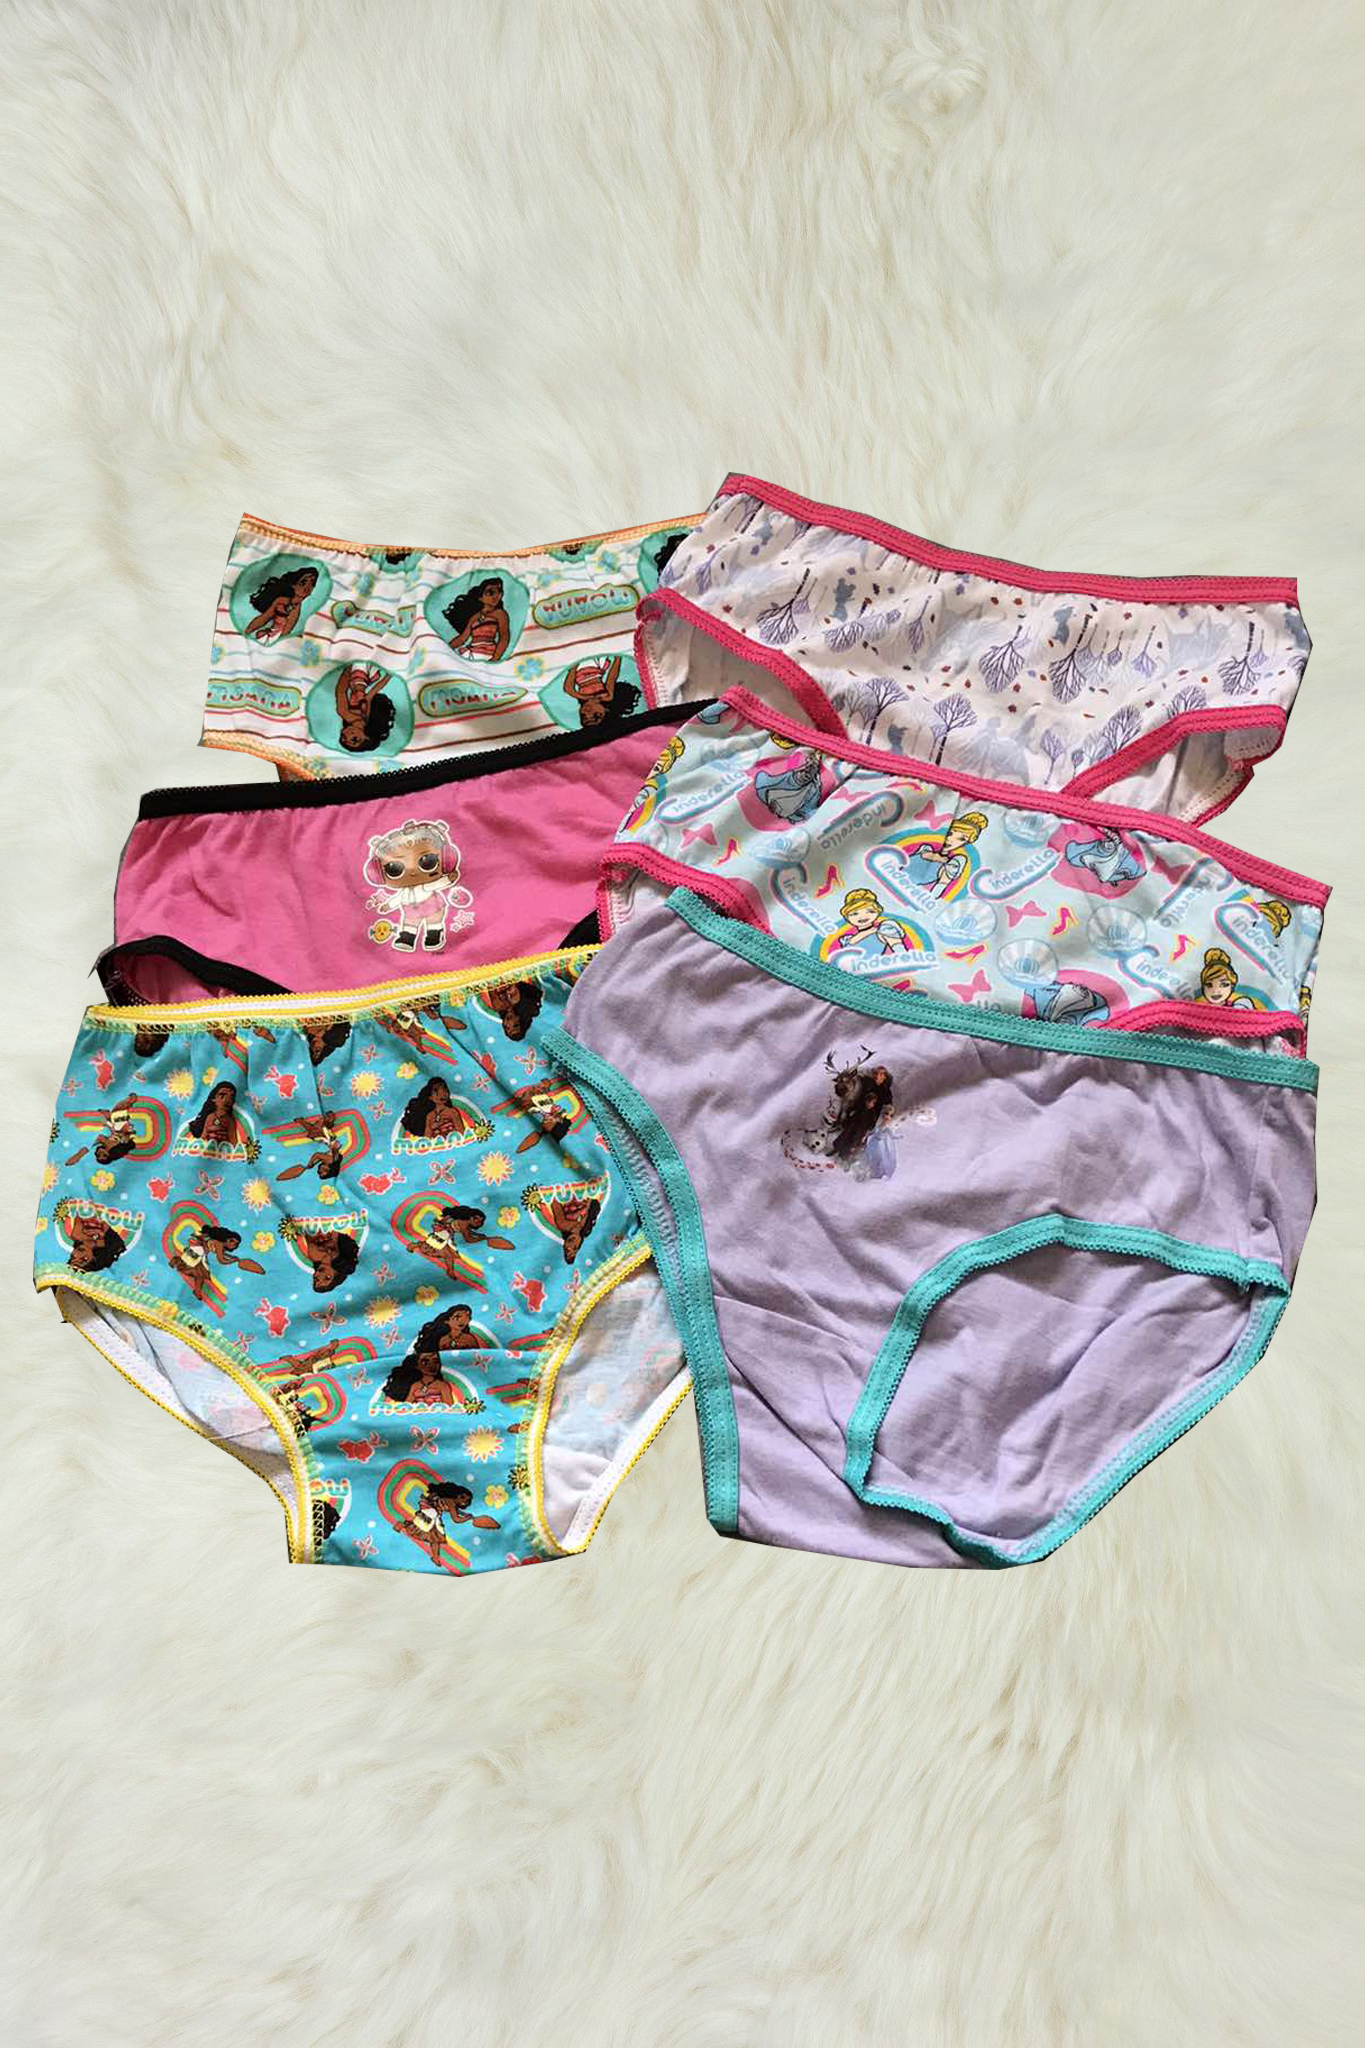 6/12pcs Cartoon Characters Colored Panty for Baby girls Sizes will fit from  2 years old toddler to 8 yr old girl